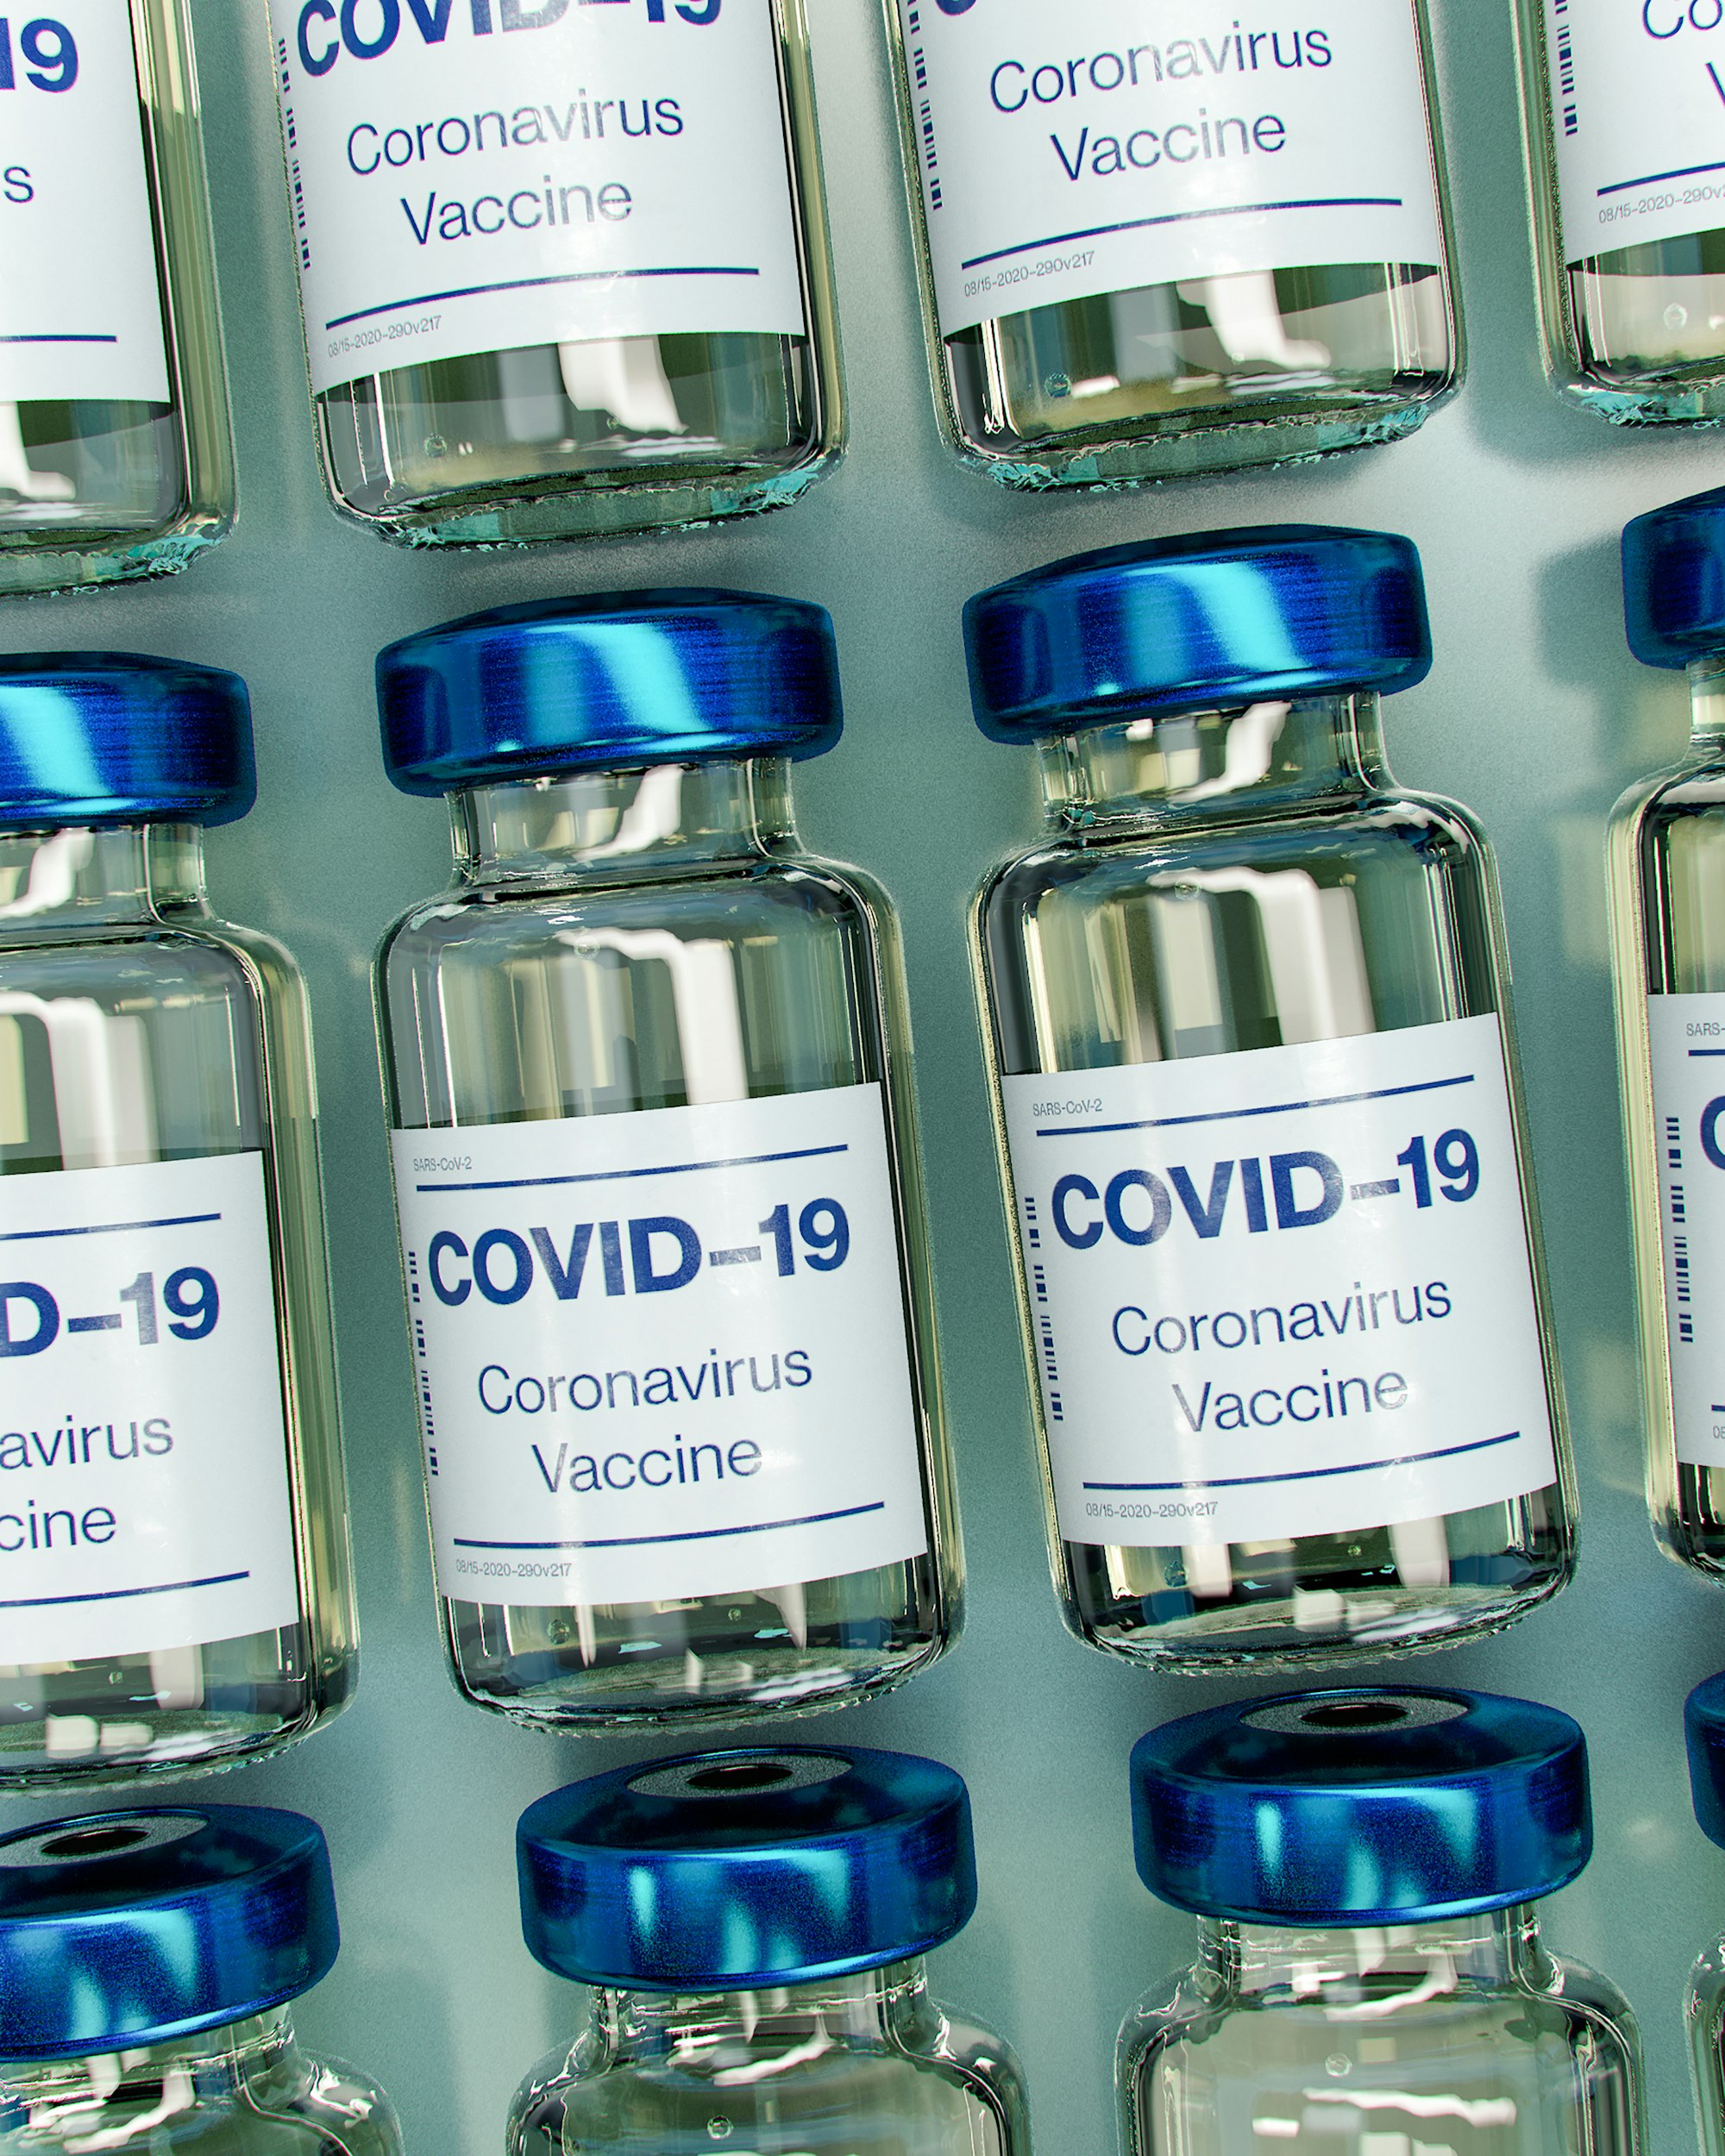 COVID still hasn't receded: Biden administration extends state of emergency on virus - Bloomberg